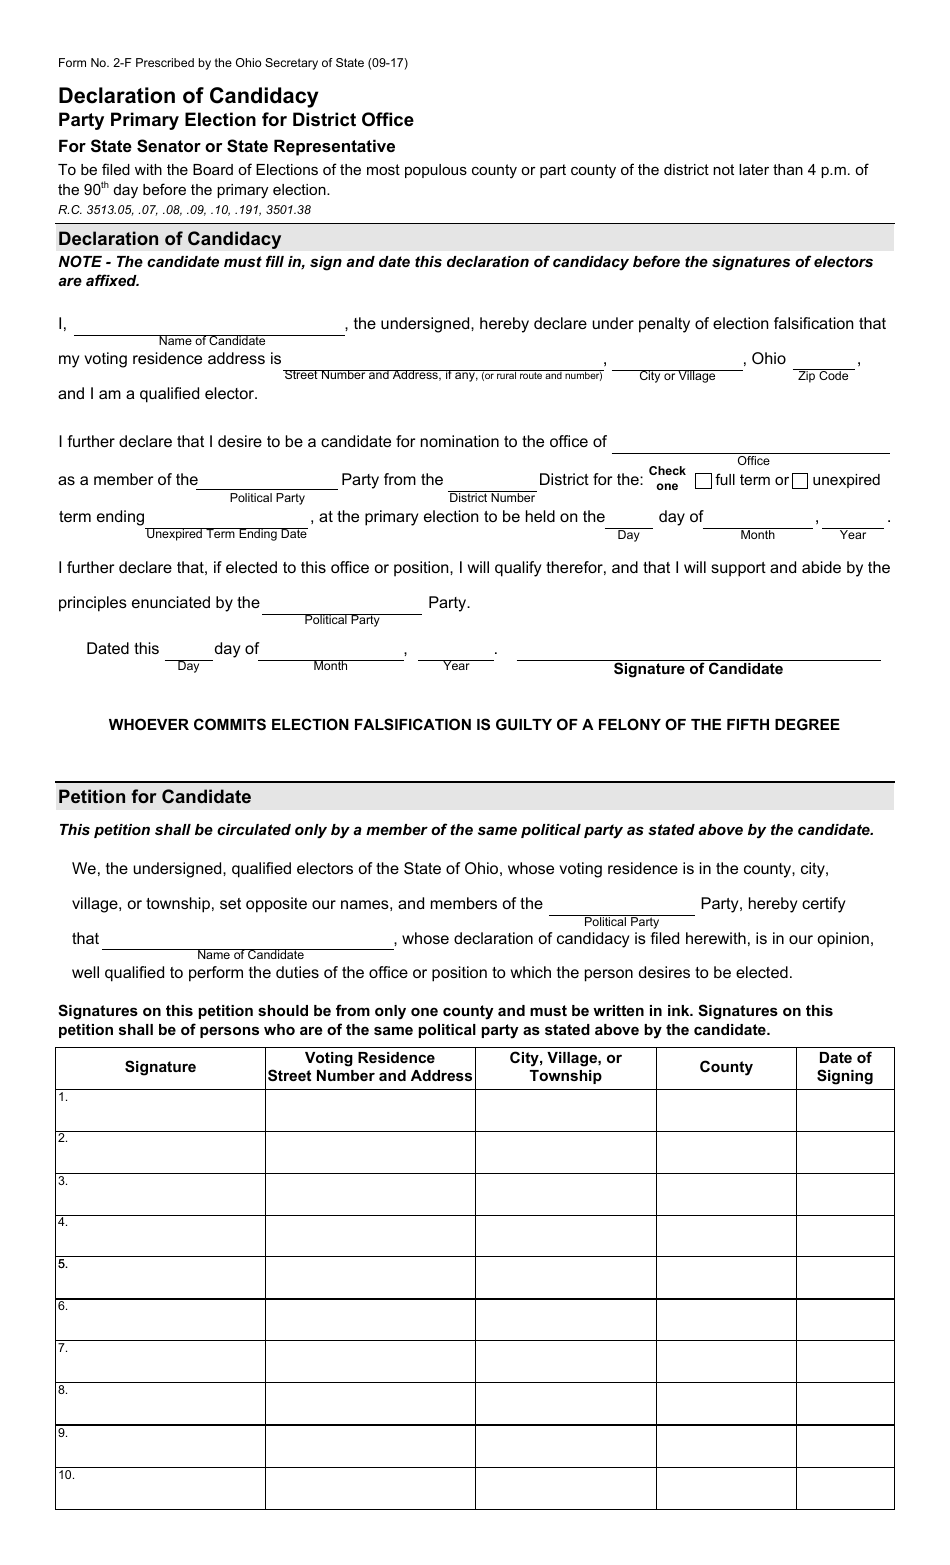 form-2-f-download-fillable-pdf-or-fill-online-declaration-of-candidacy